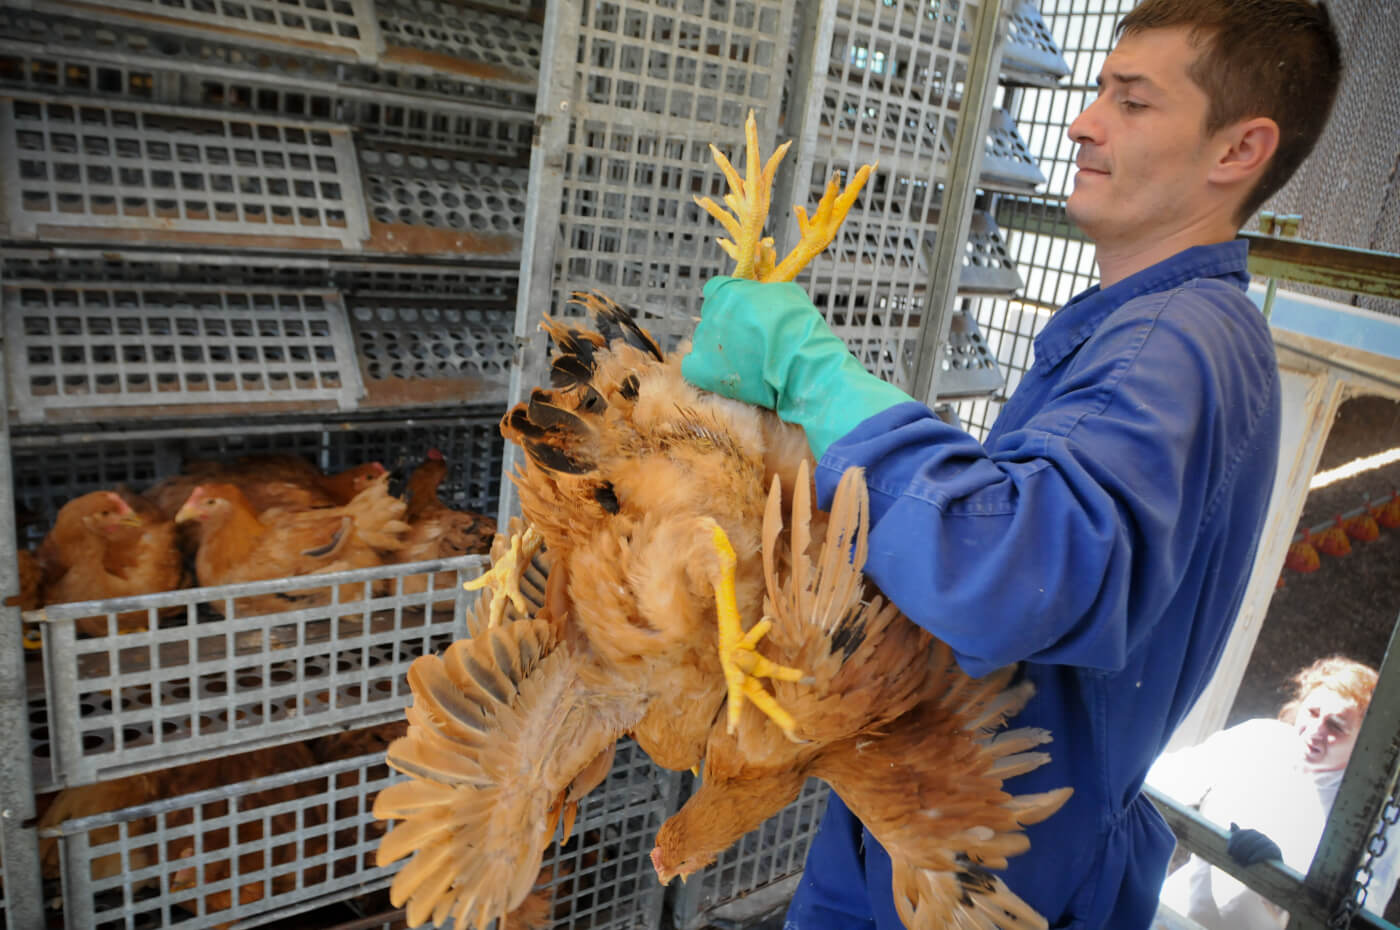 free range chicken being loaded into cage for transport